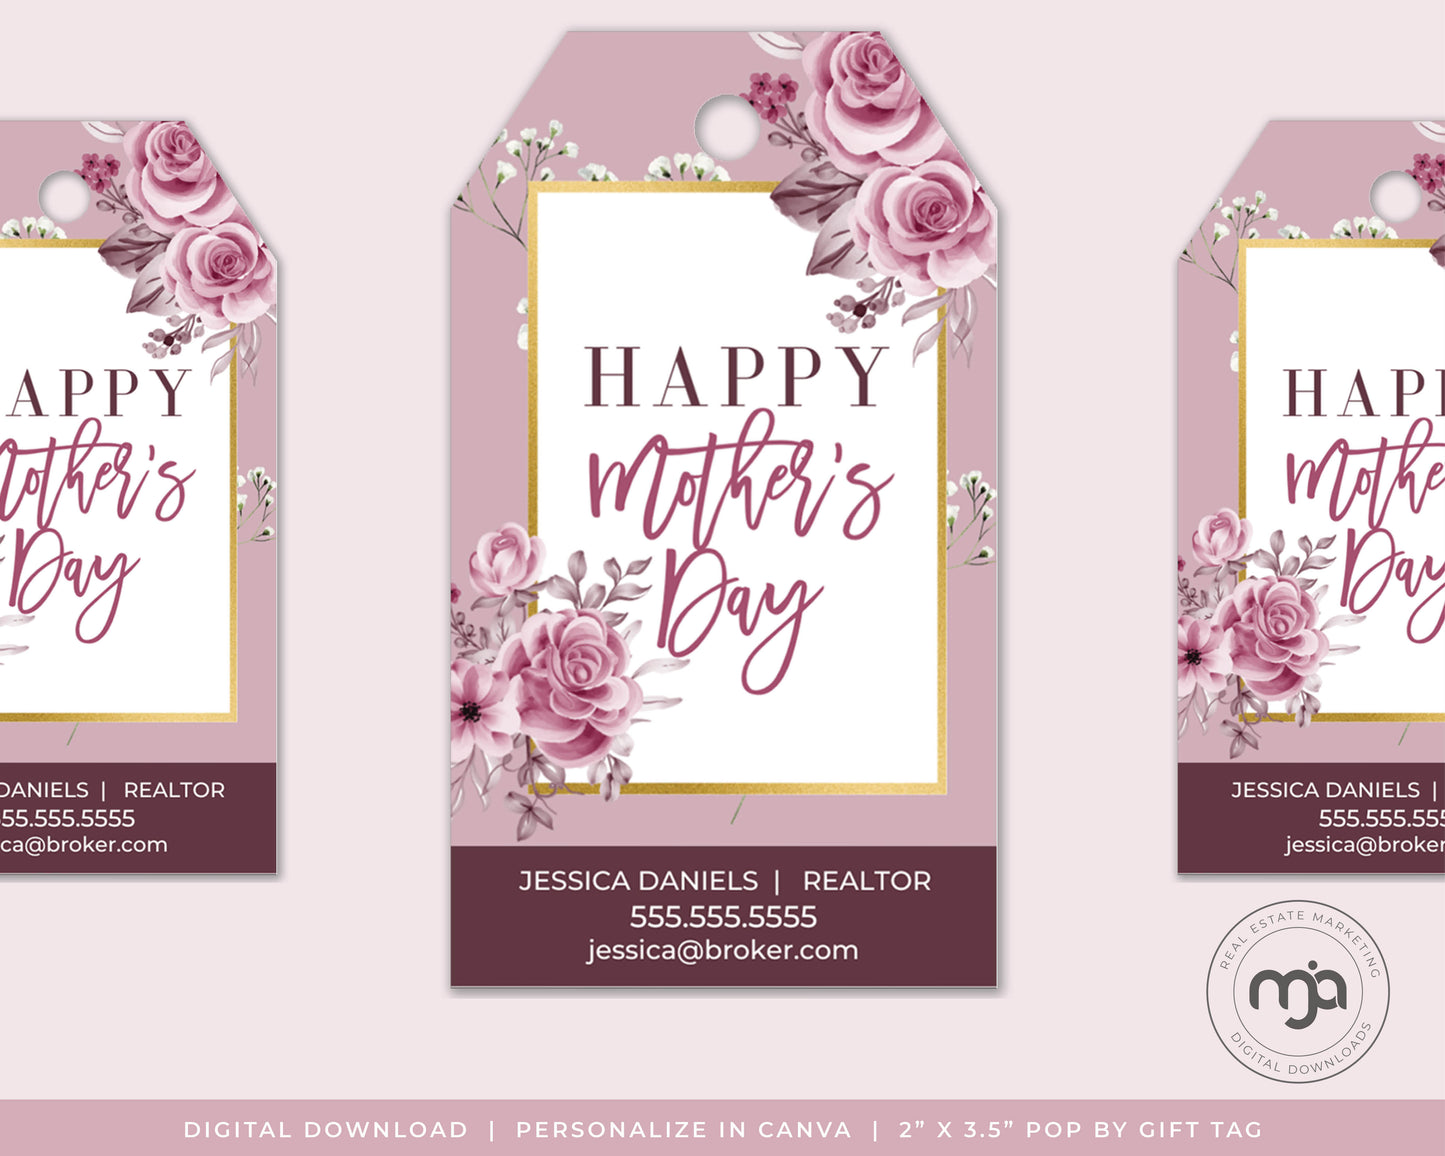 Happy Mothers Day - Mothers Day Pop By Gift Tag